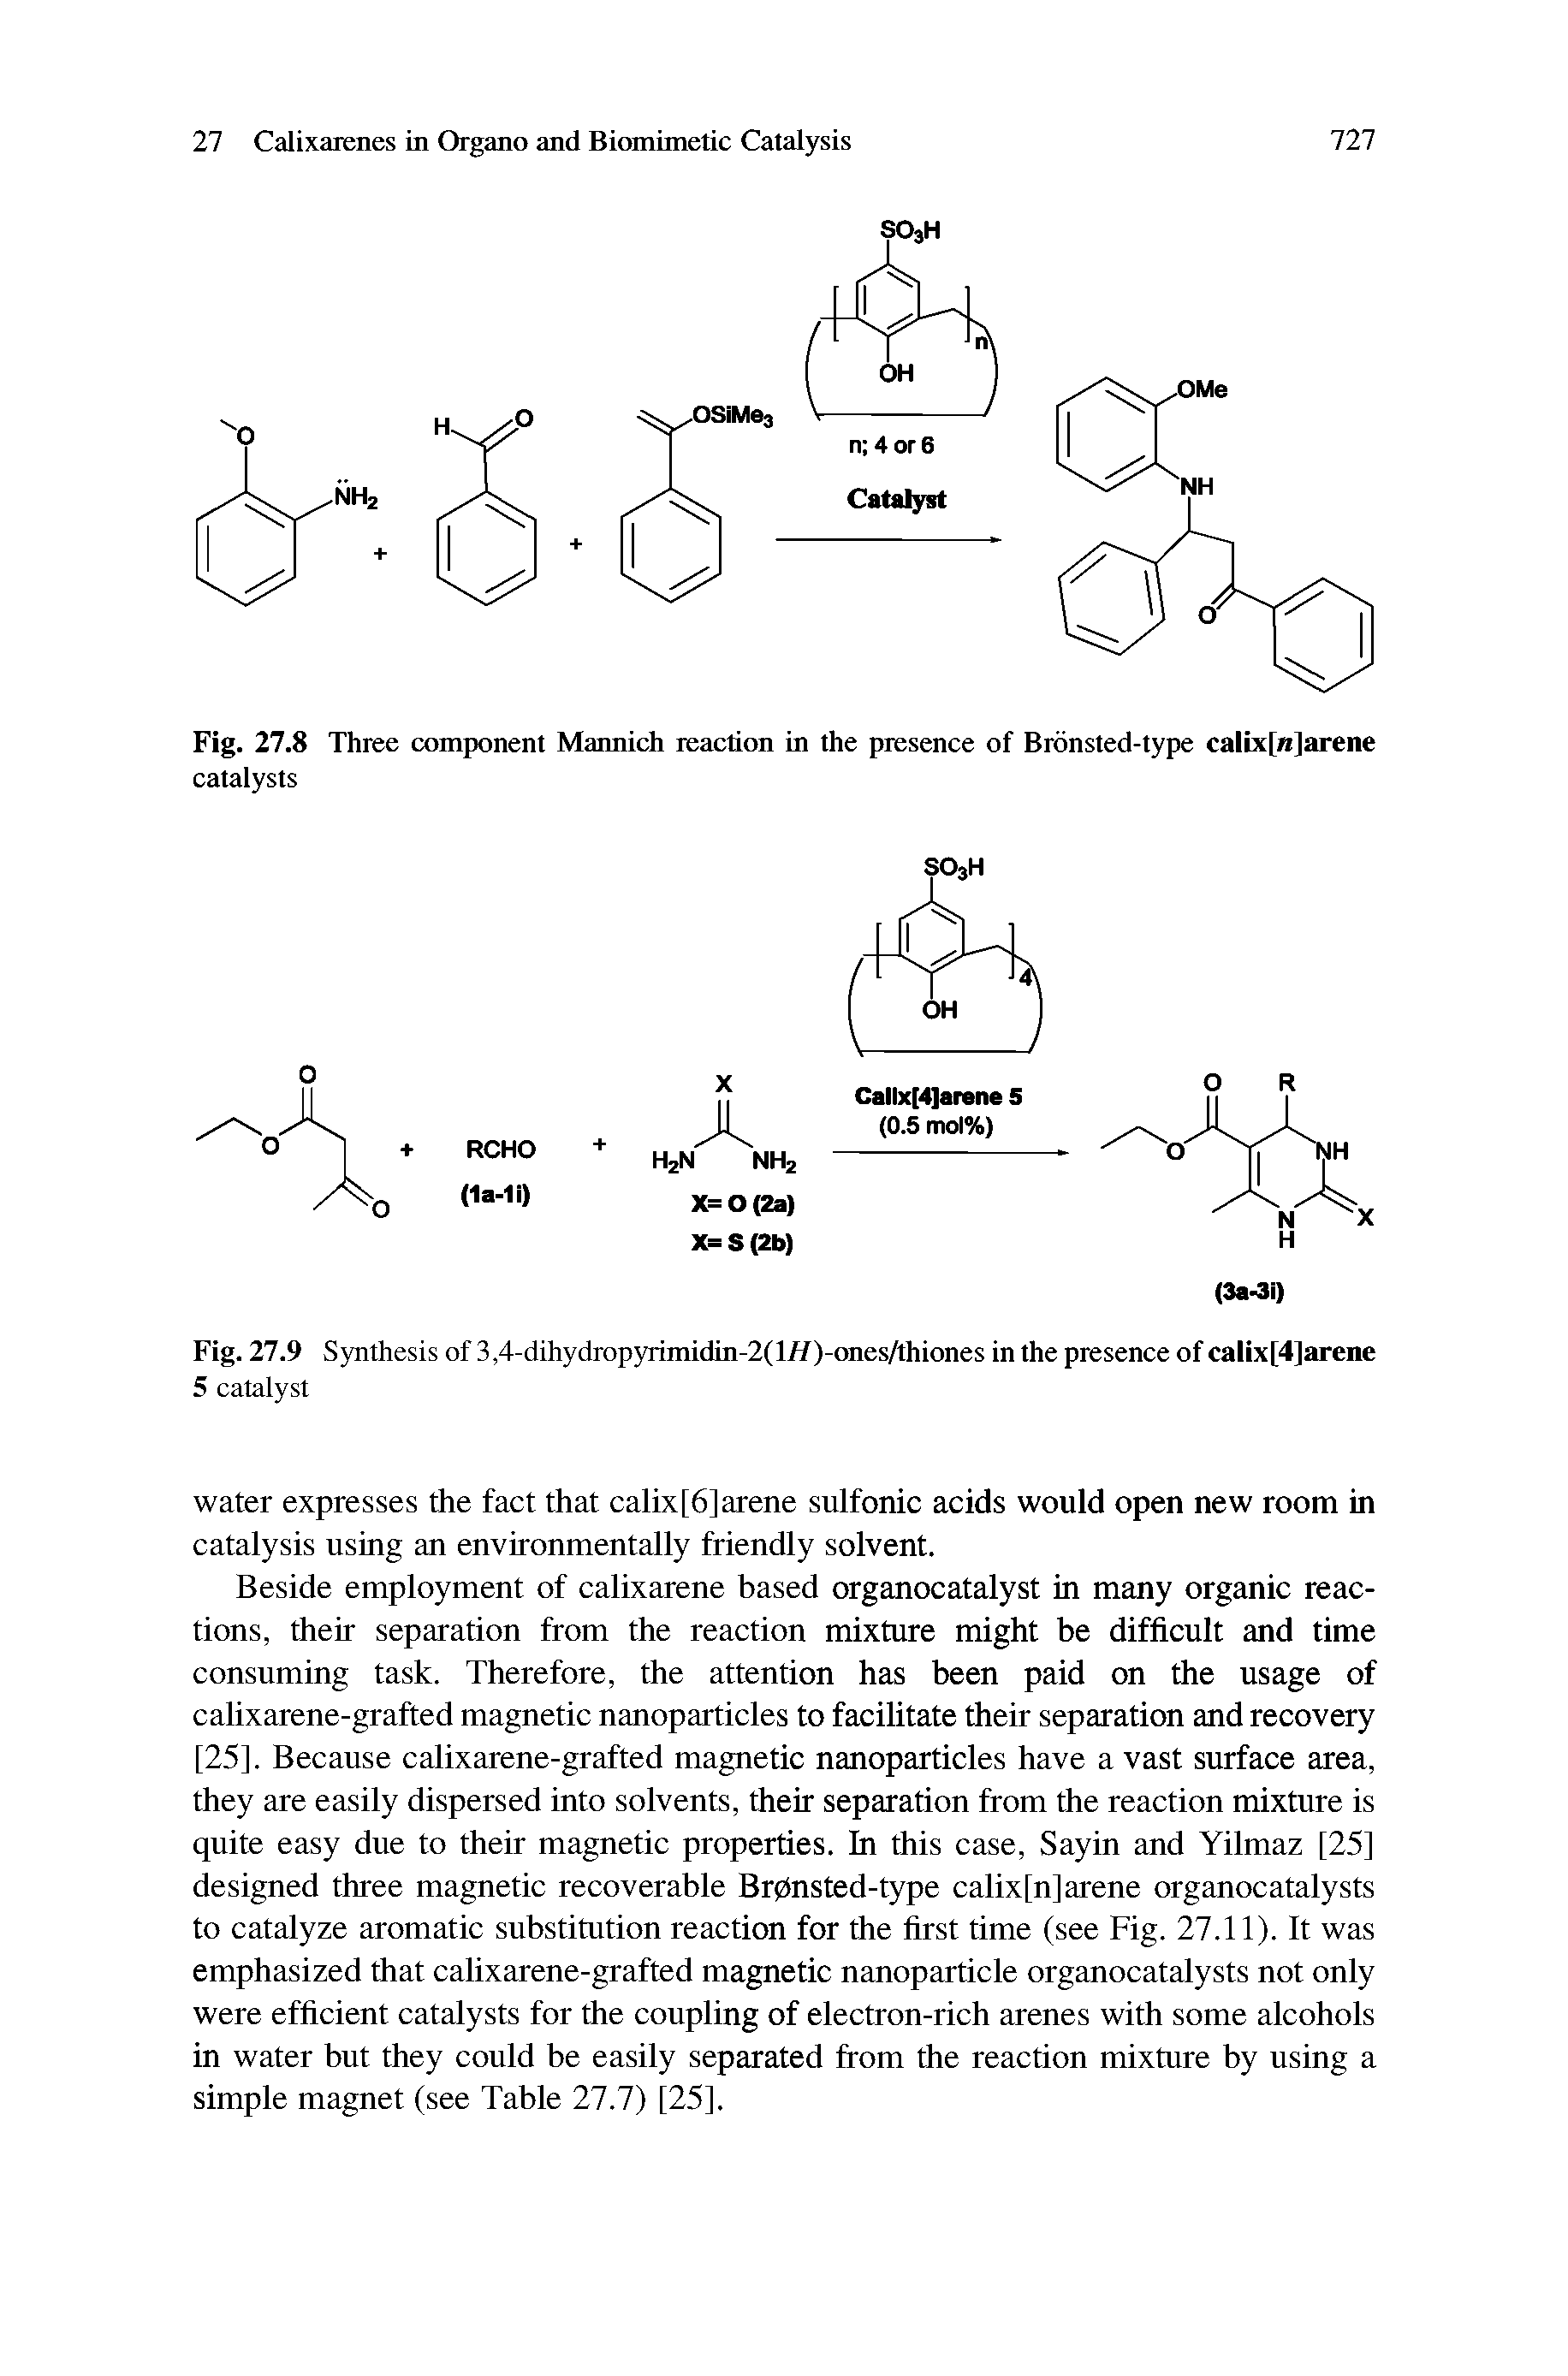 Fig. 27.8 Three component Mannich reaction in the presence of Bronsted-type calix[n]arene catalysts...